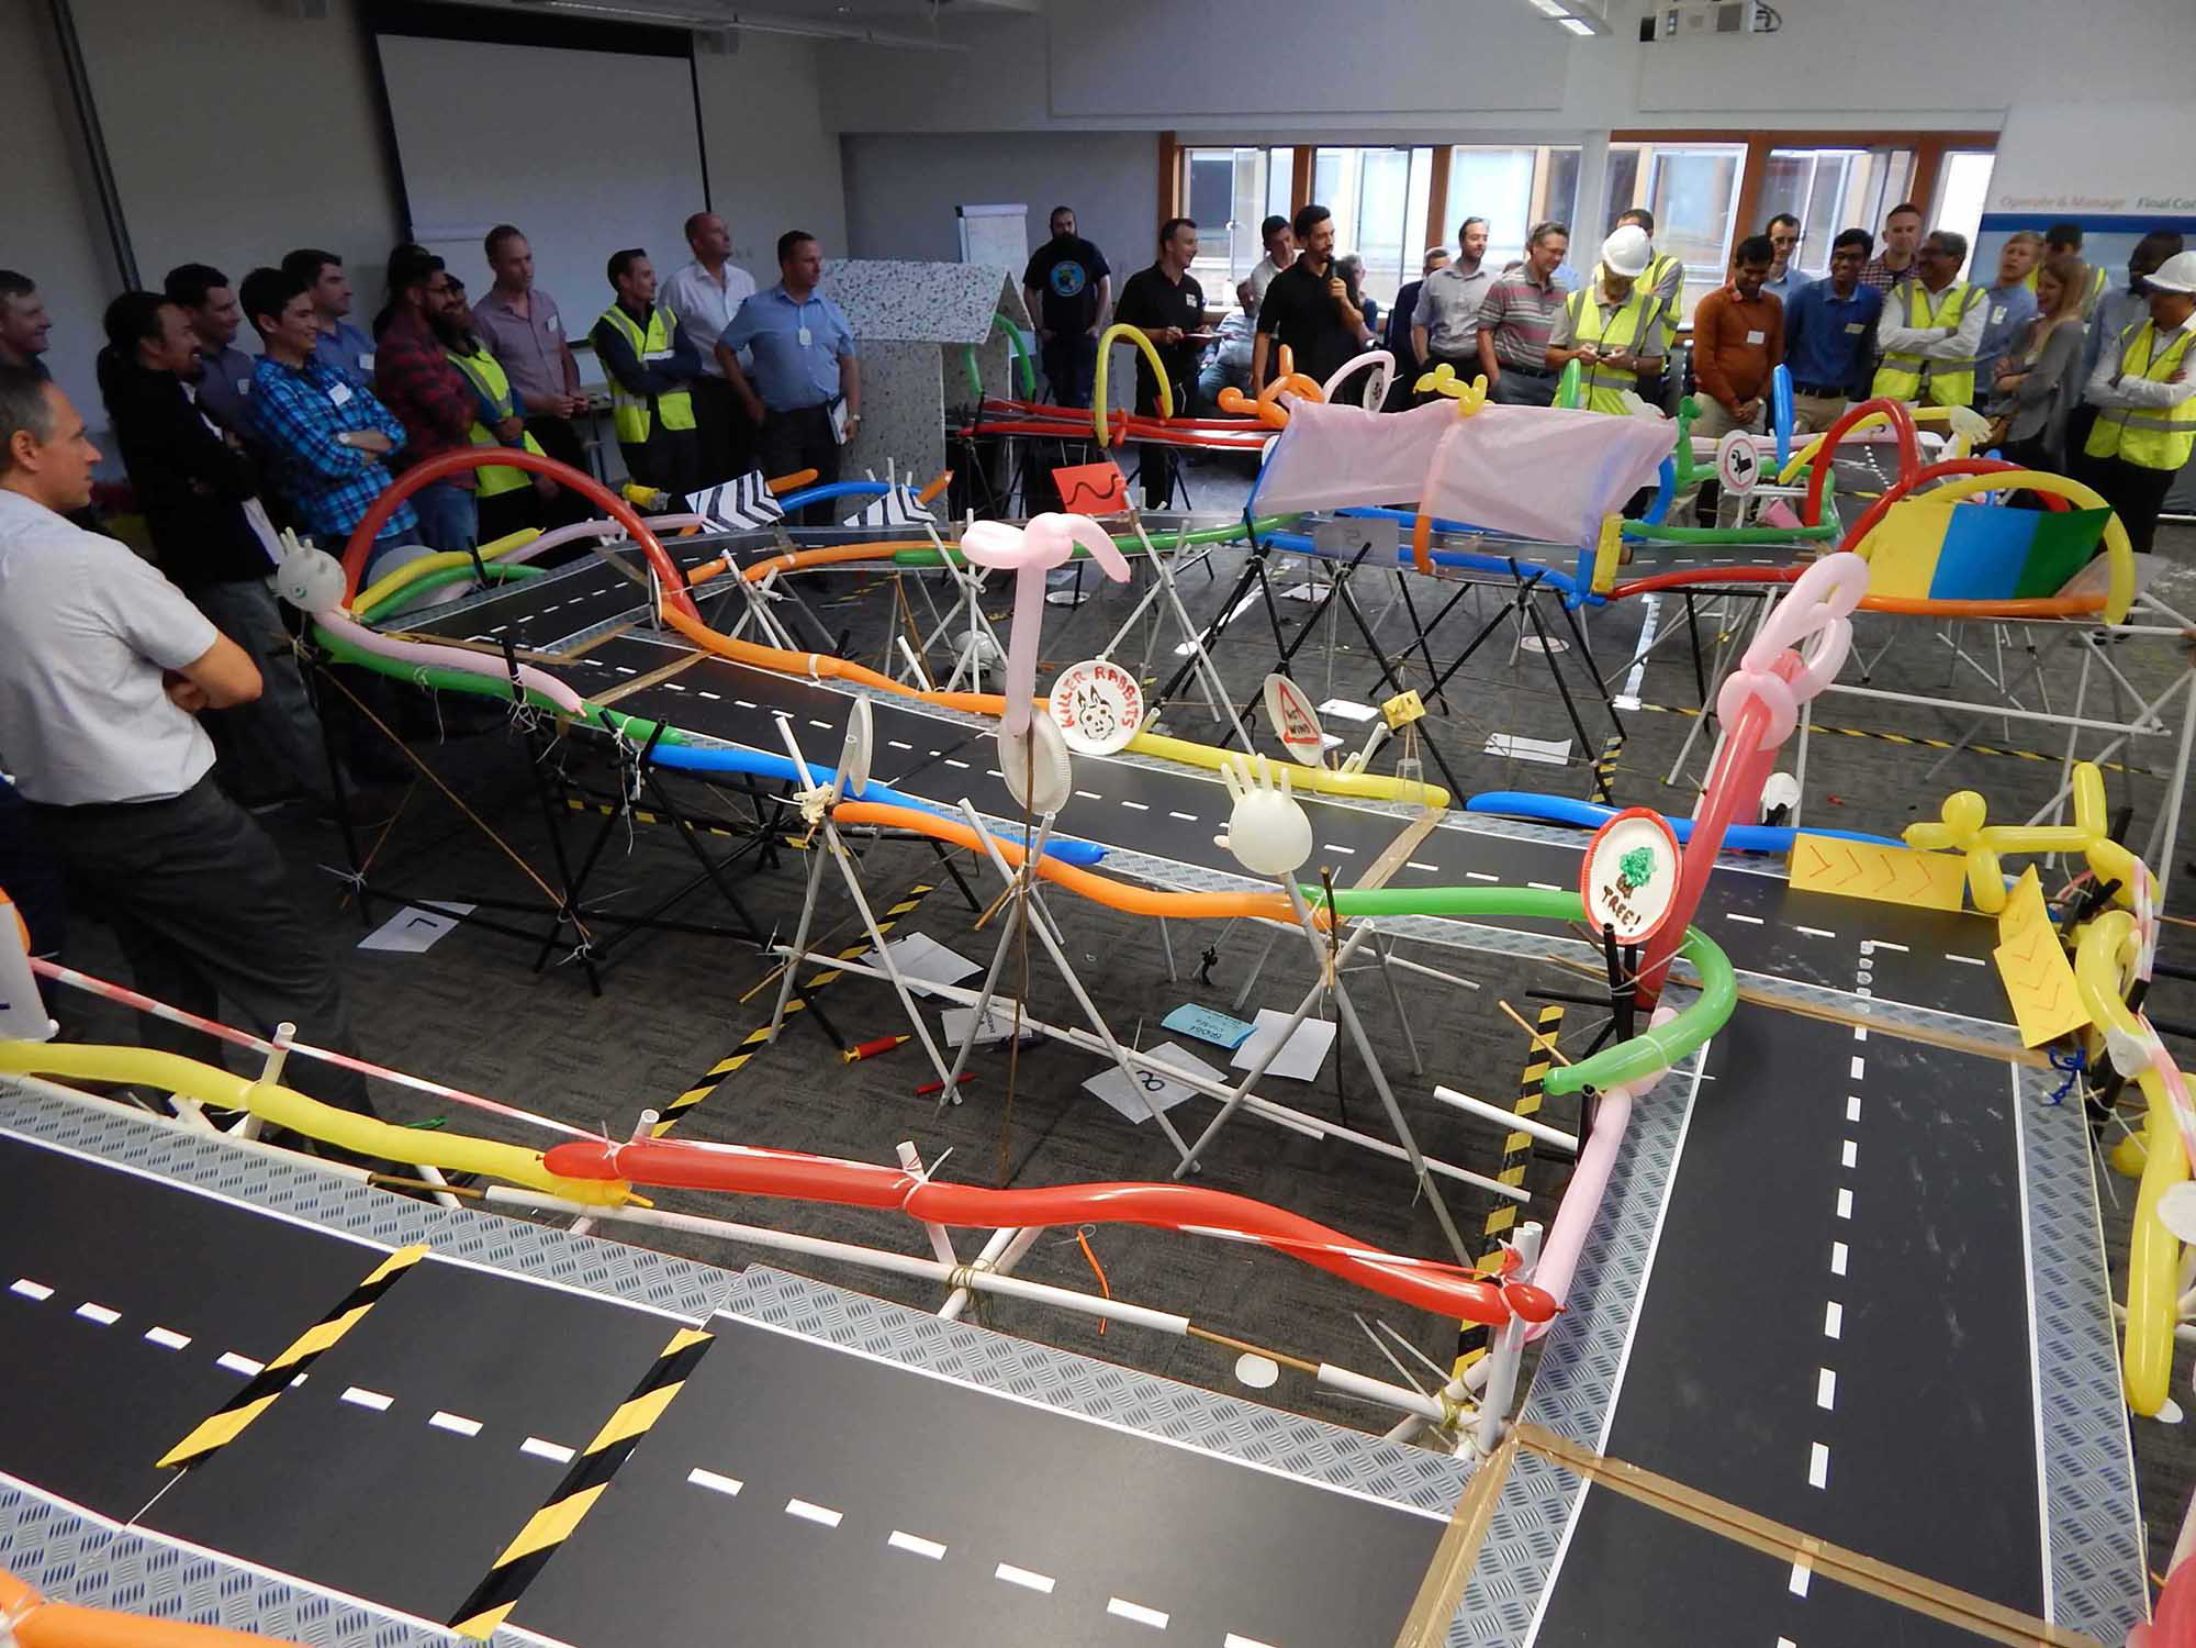 Indoor Team Building Events in High Wycombe